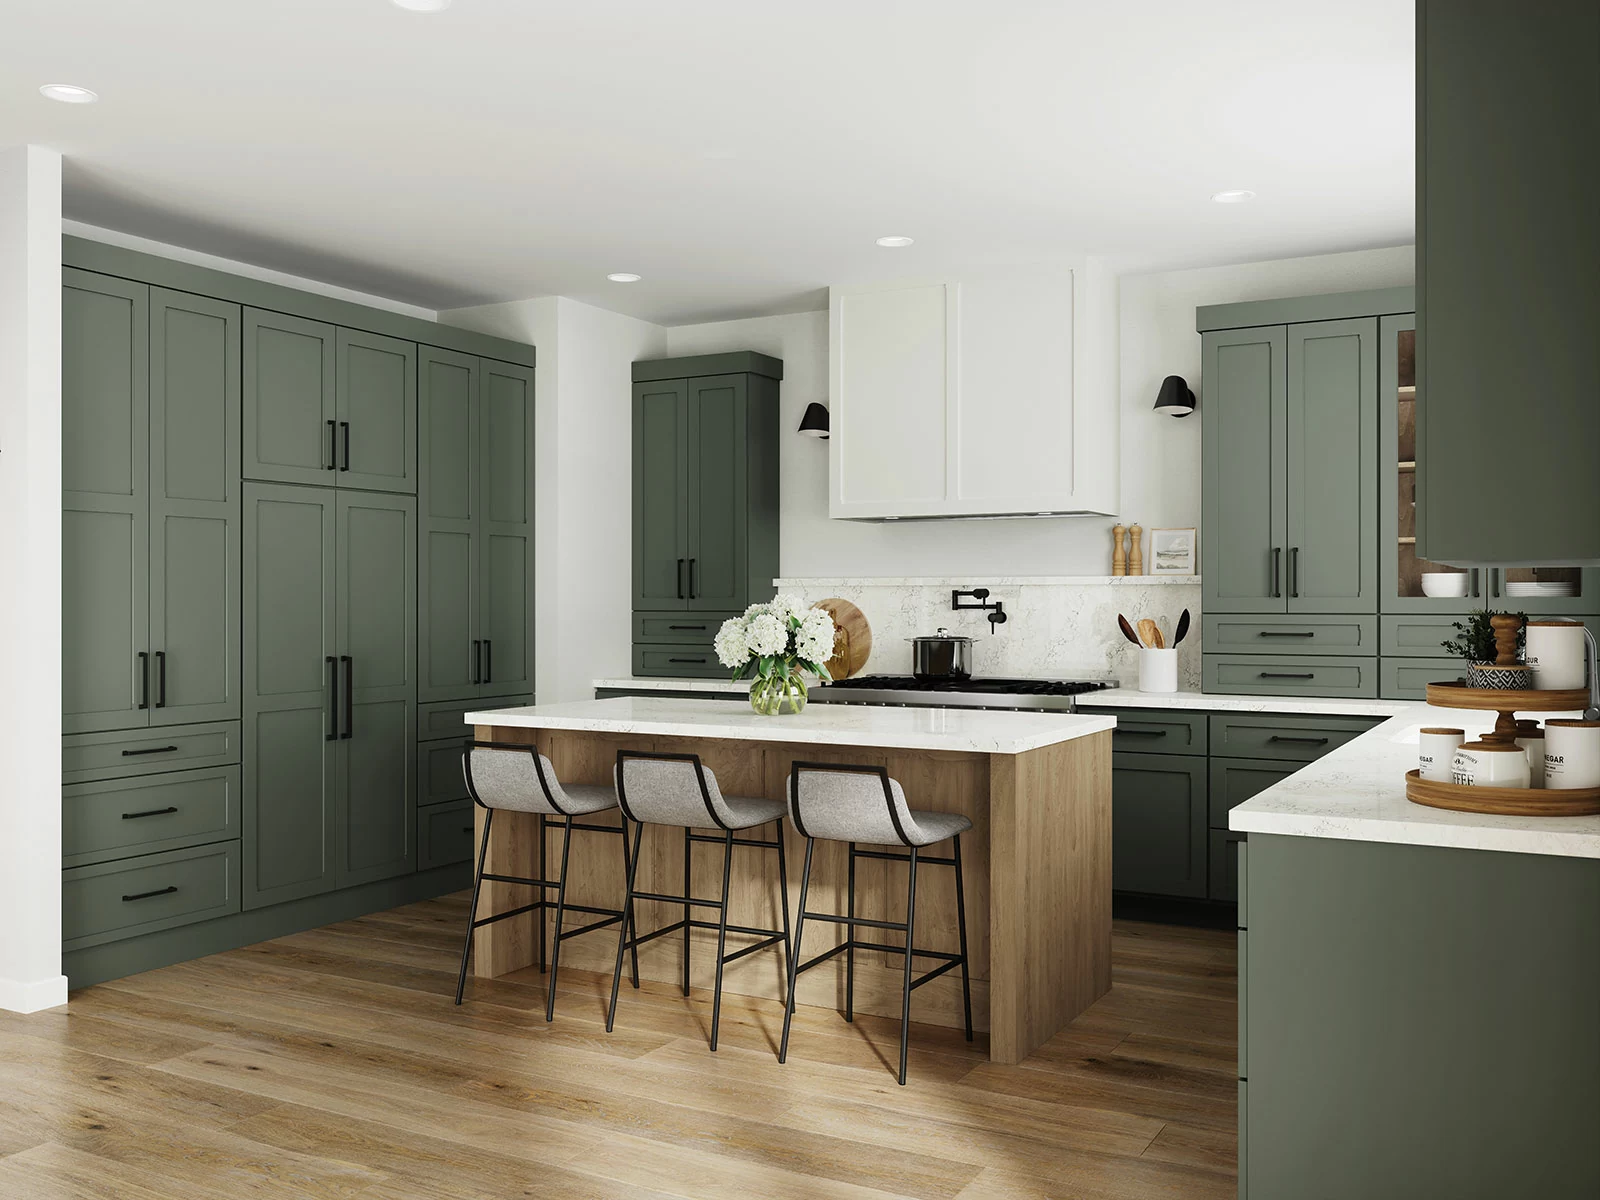 A modern farmhouse kitchen renovation with a combination of green painted and light stained wood cabinets with a white painted wood hood.